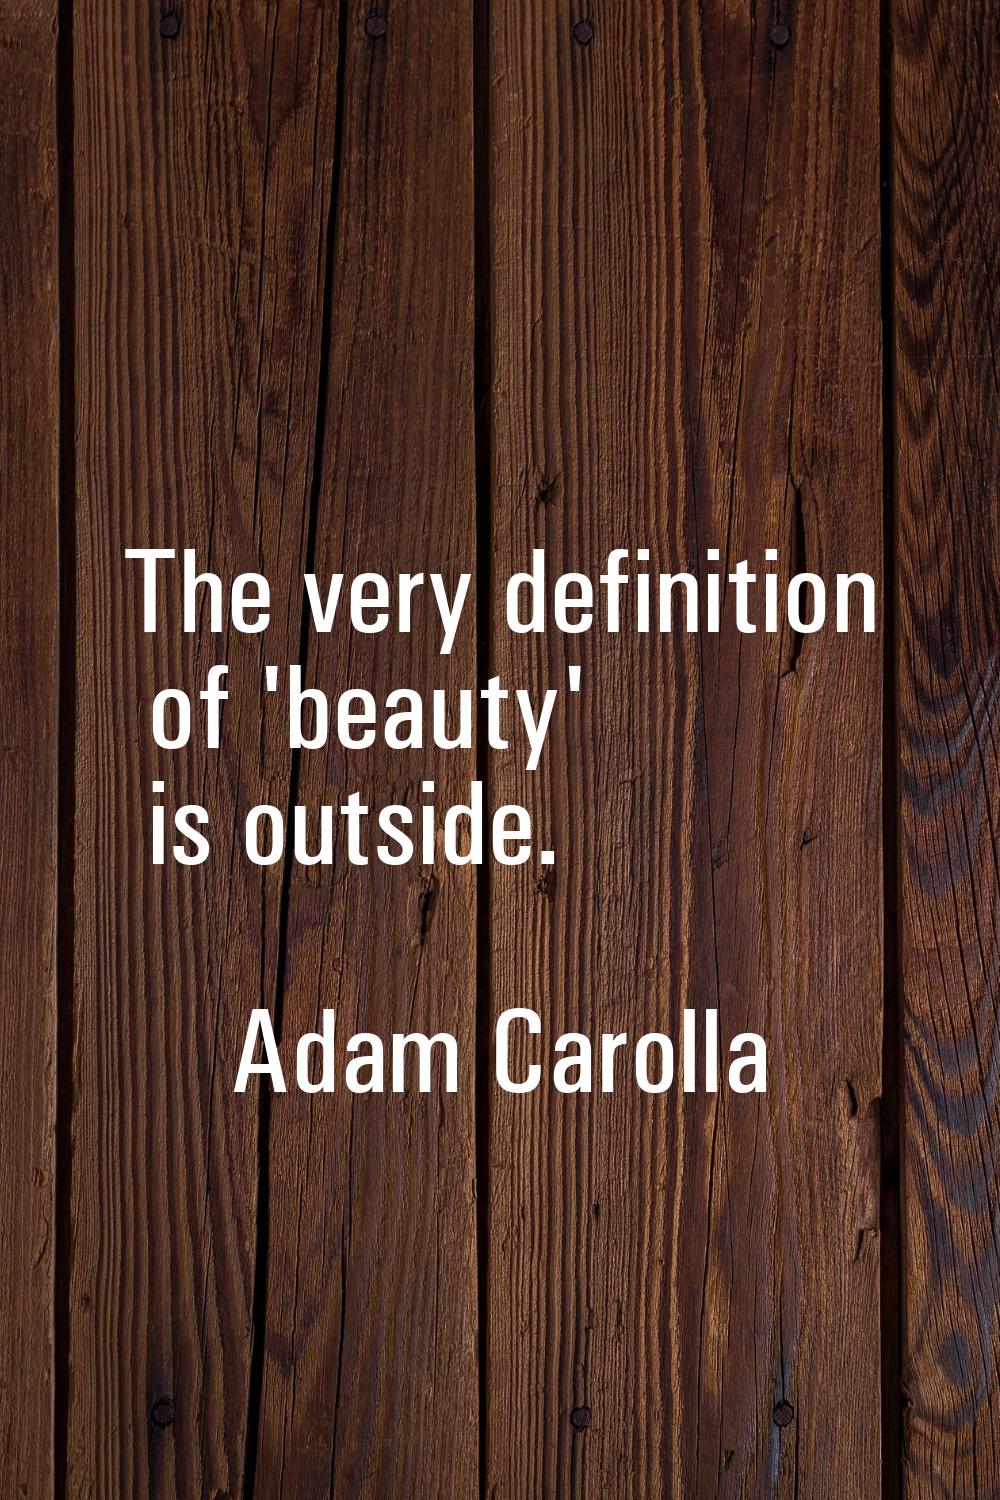 The very definition of 'beauty' is outside.